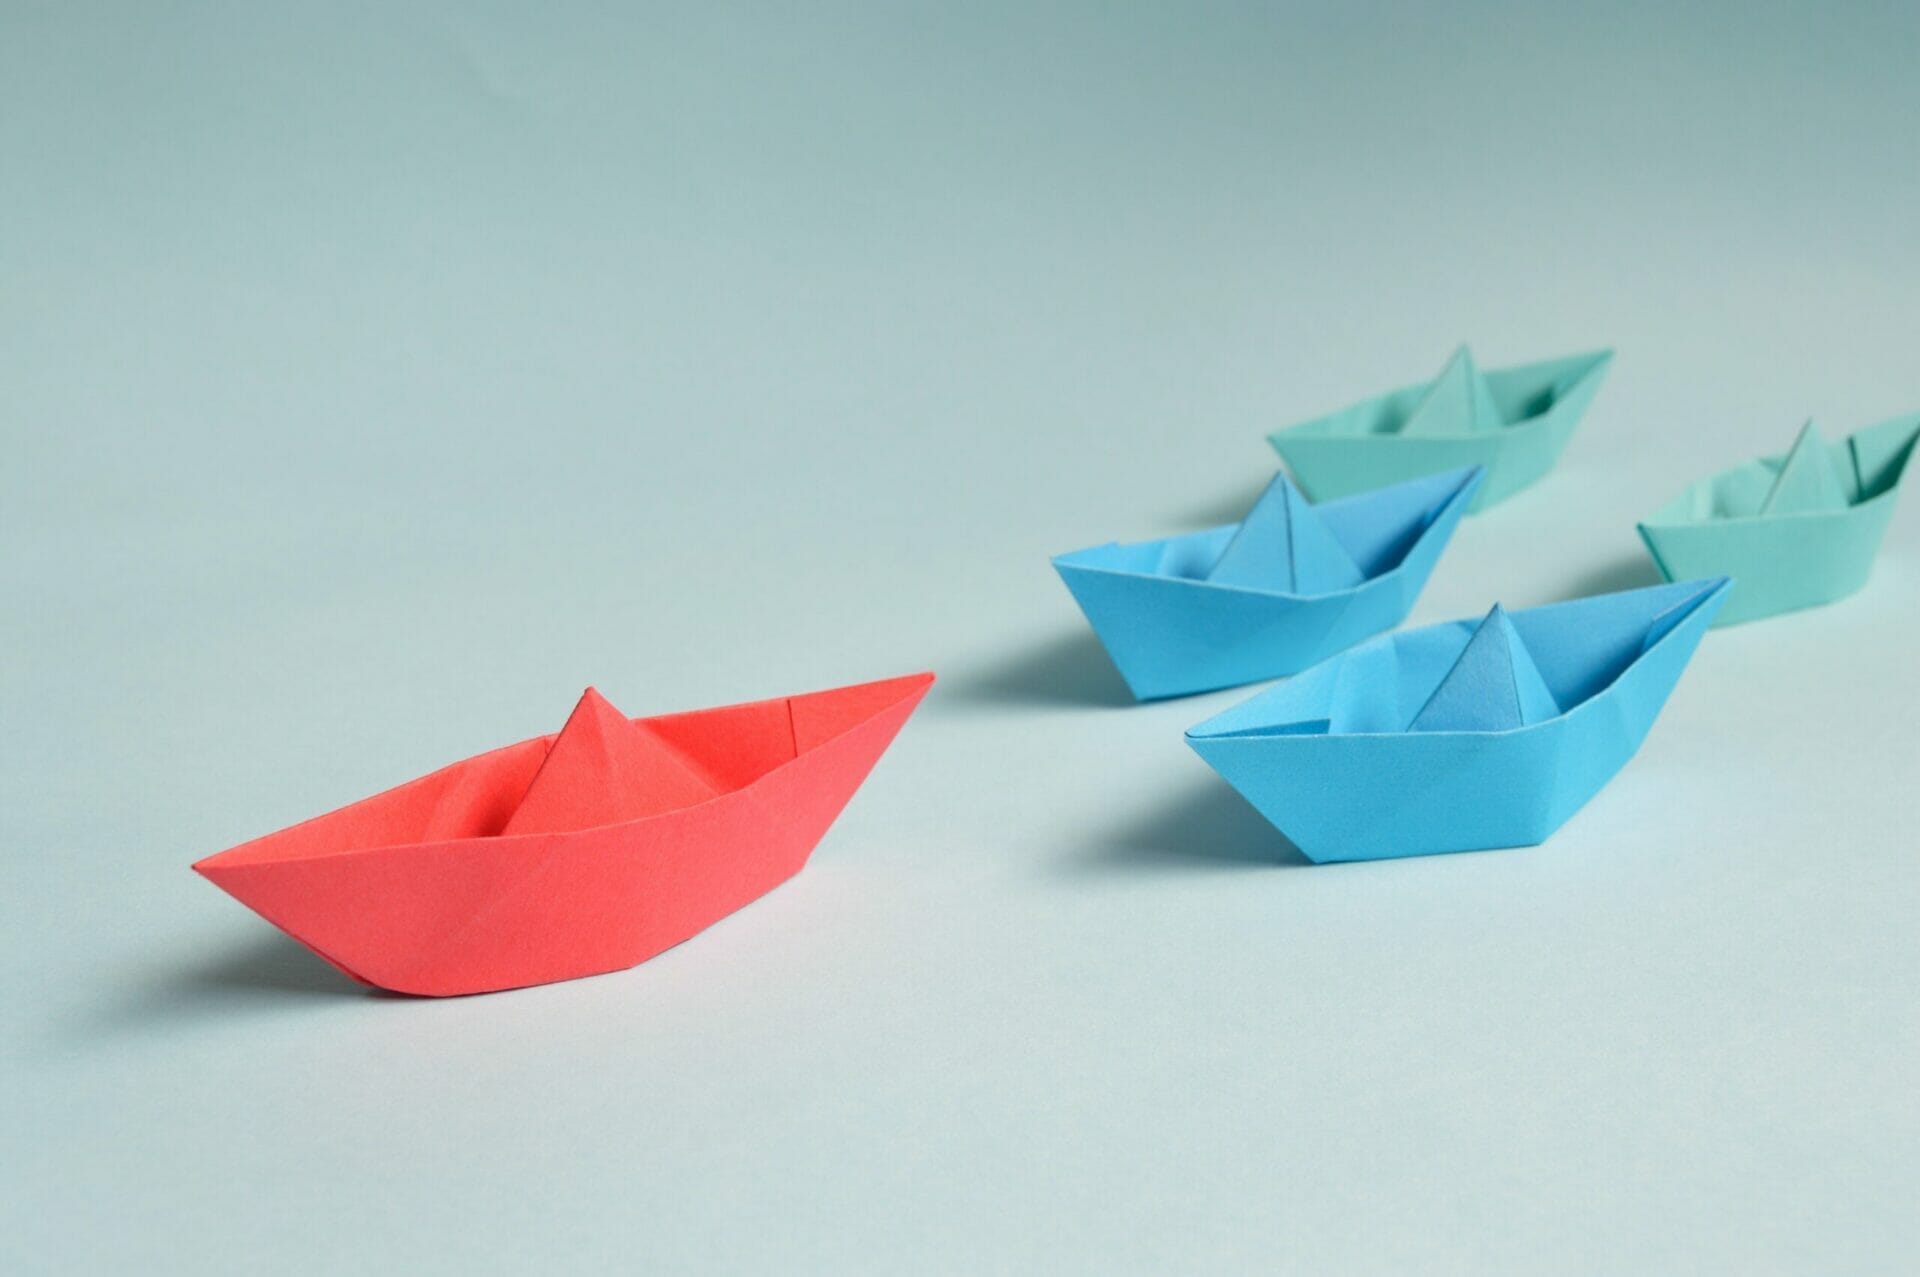 White backdrop, 3 blue paper boats are following one red paper boat